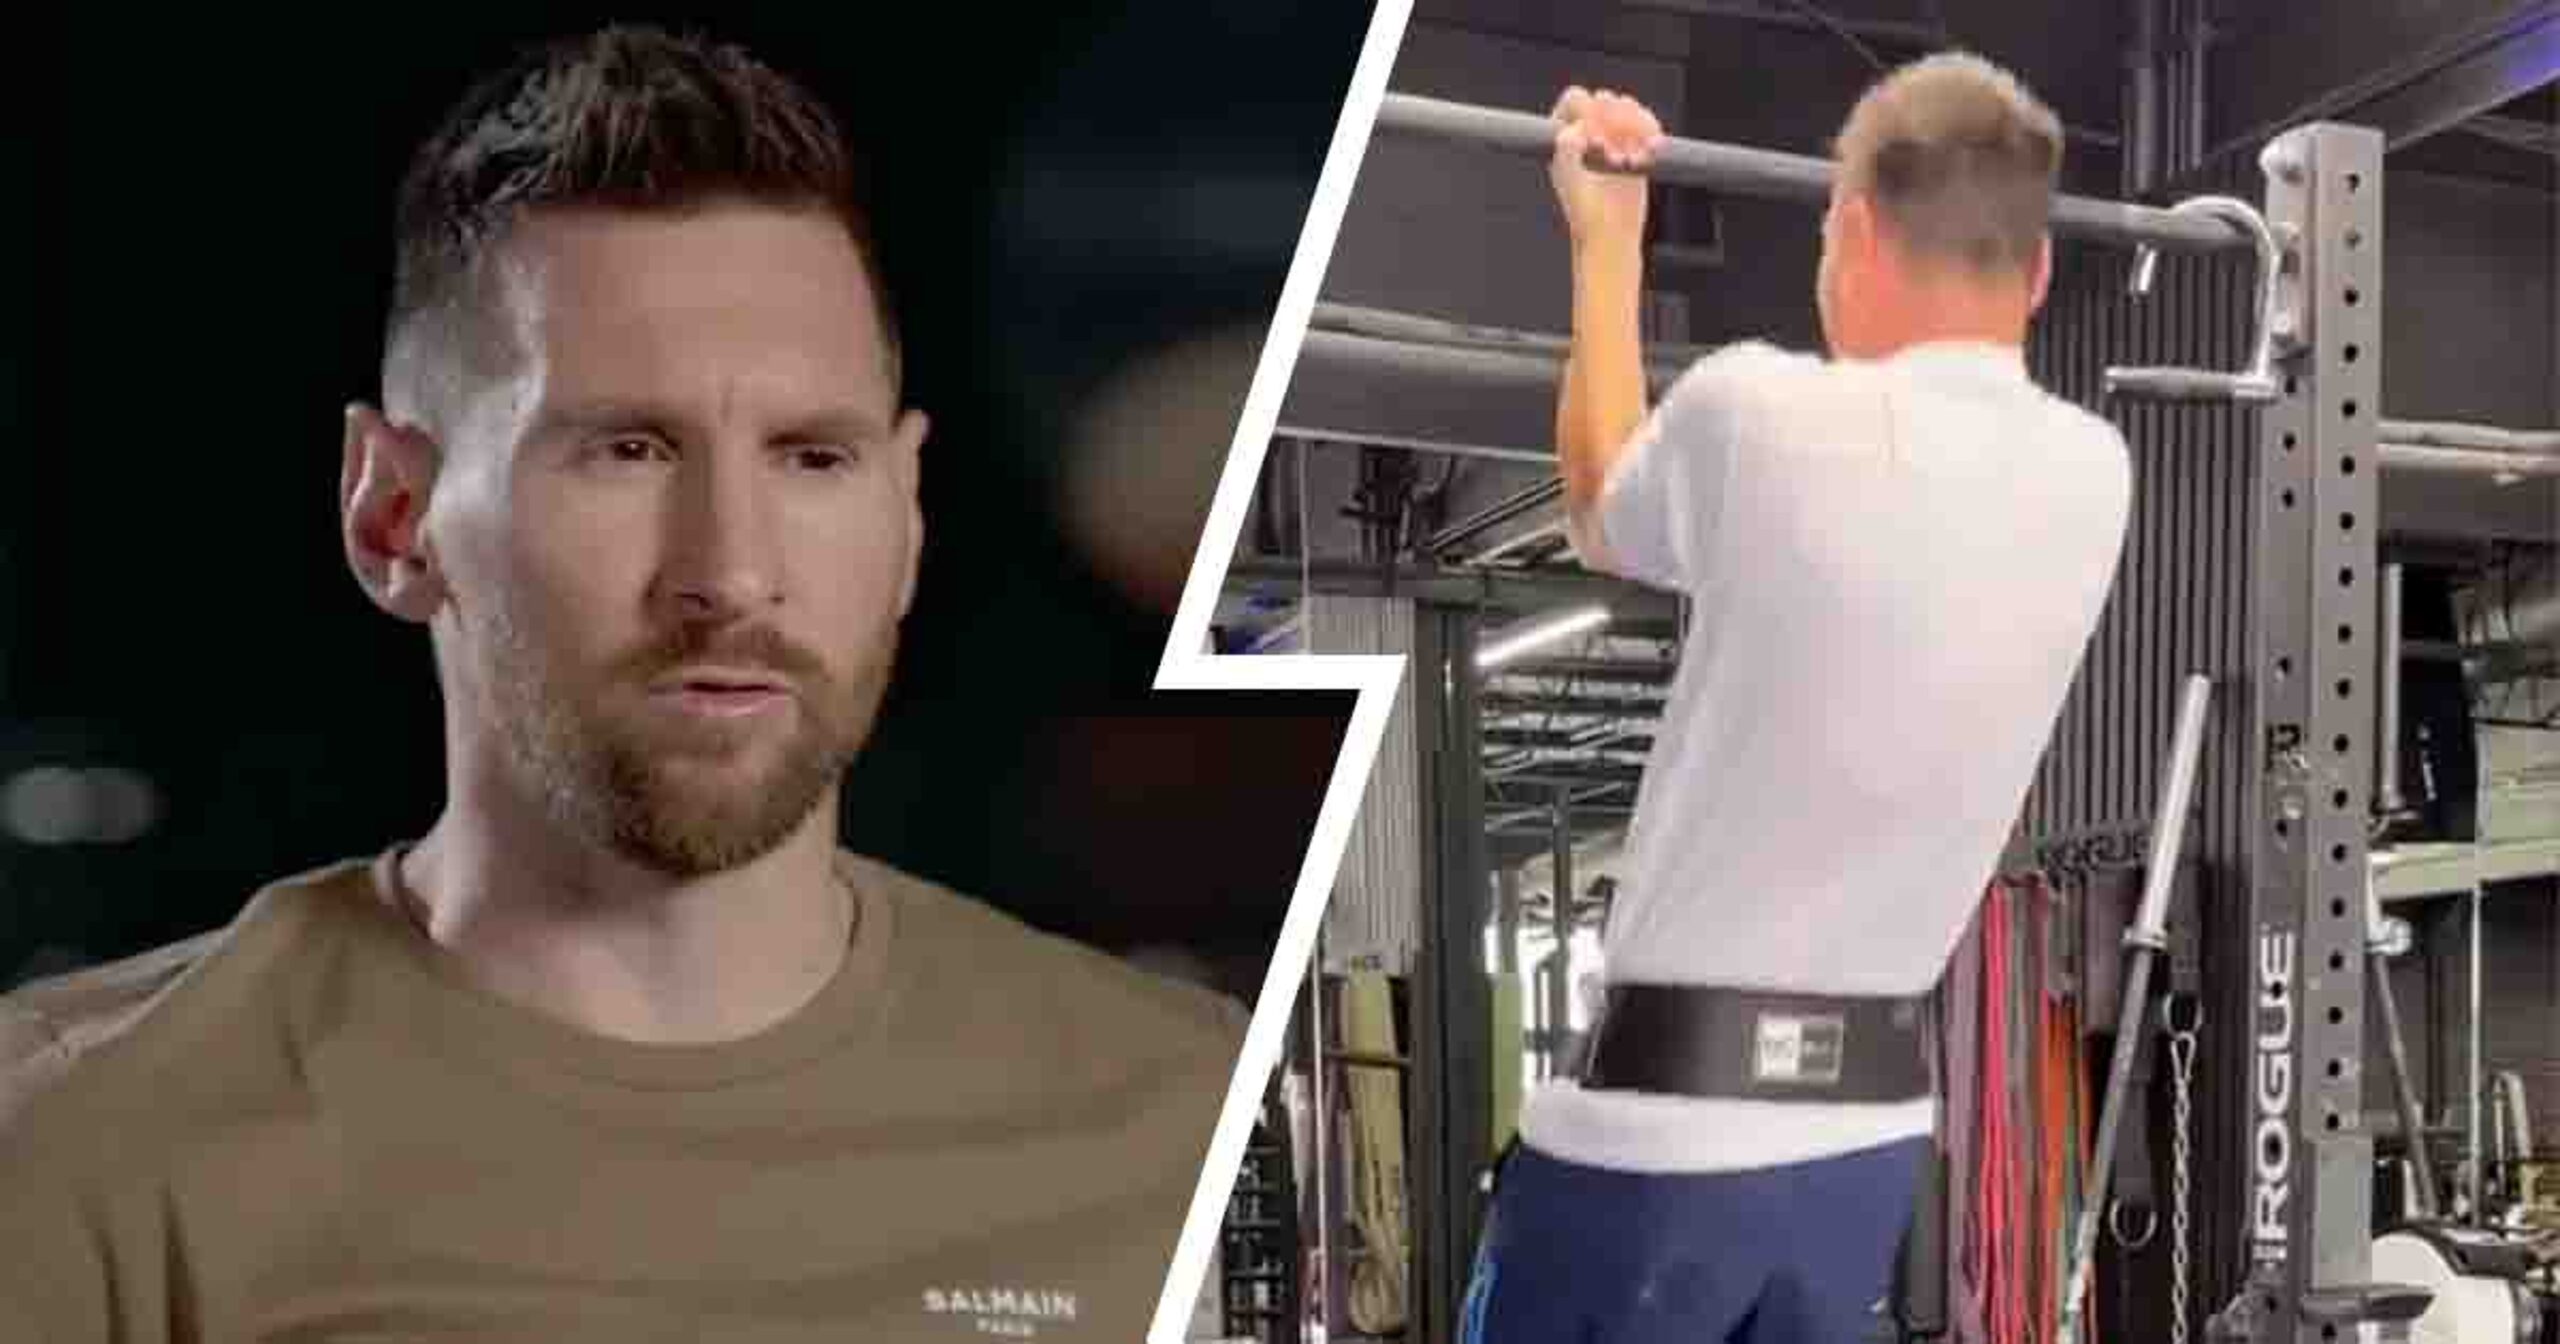 See Lionel Messi Defy Gravity With Weighted Pull-Ups In Rare Gym Footage